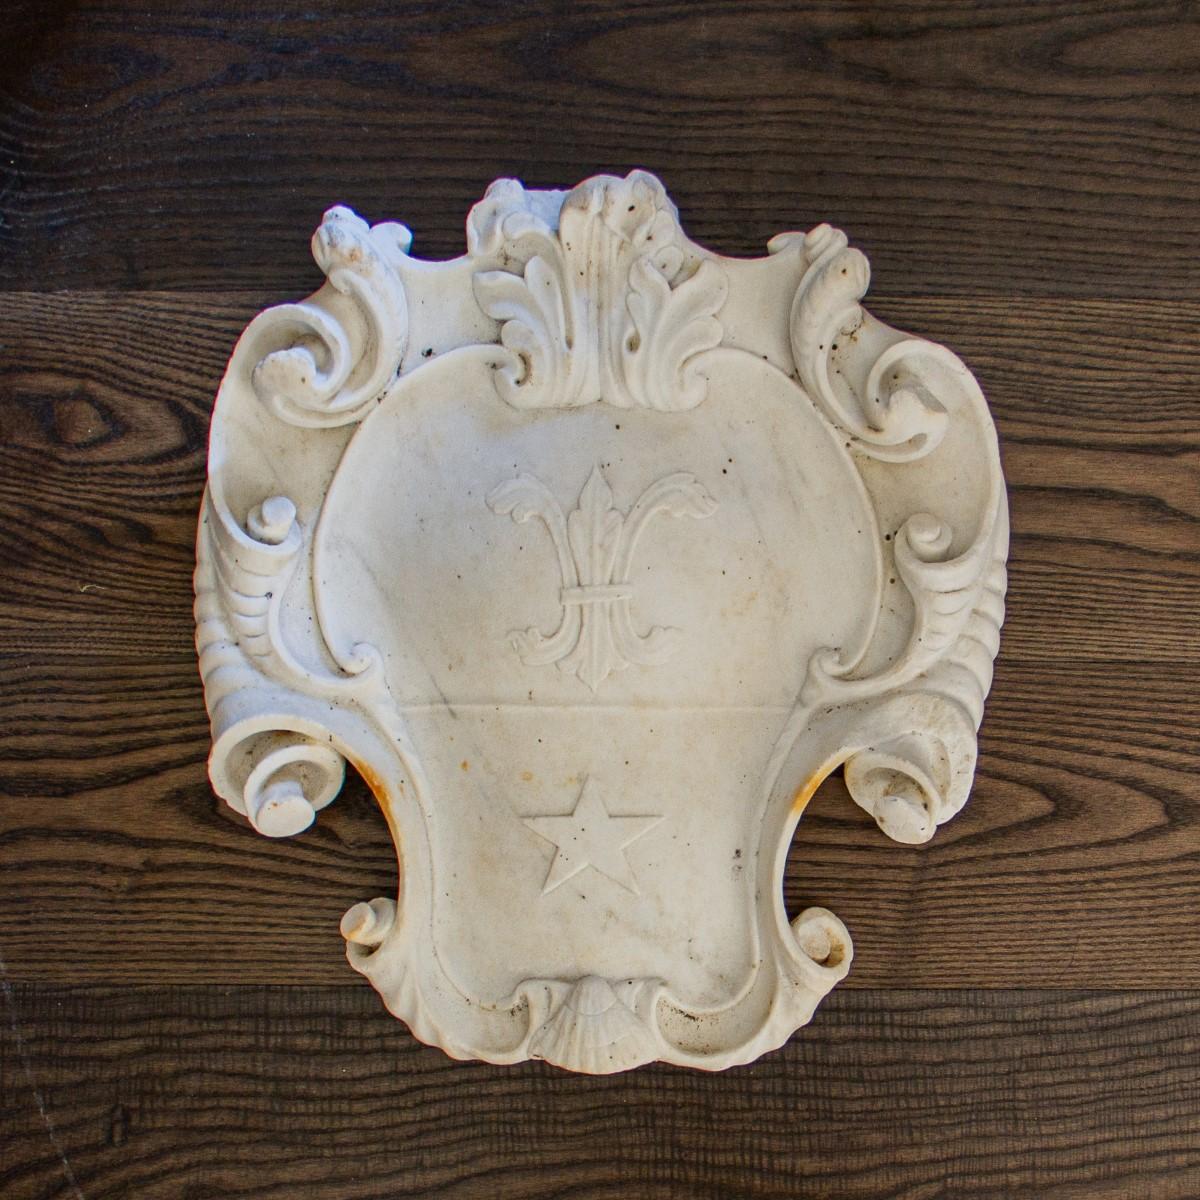 Late 18th century continental carved white marble cartouche or shield bearing a star and decorated with foliage and scrolling carvings.